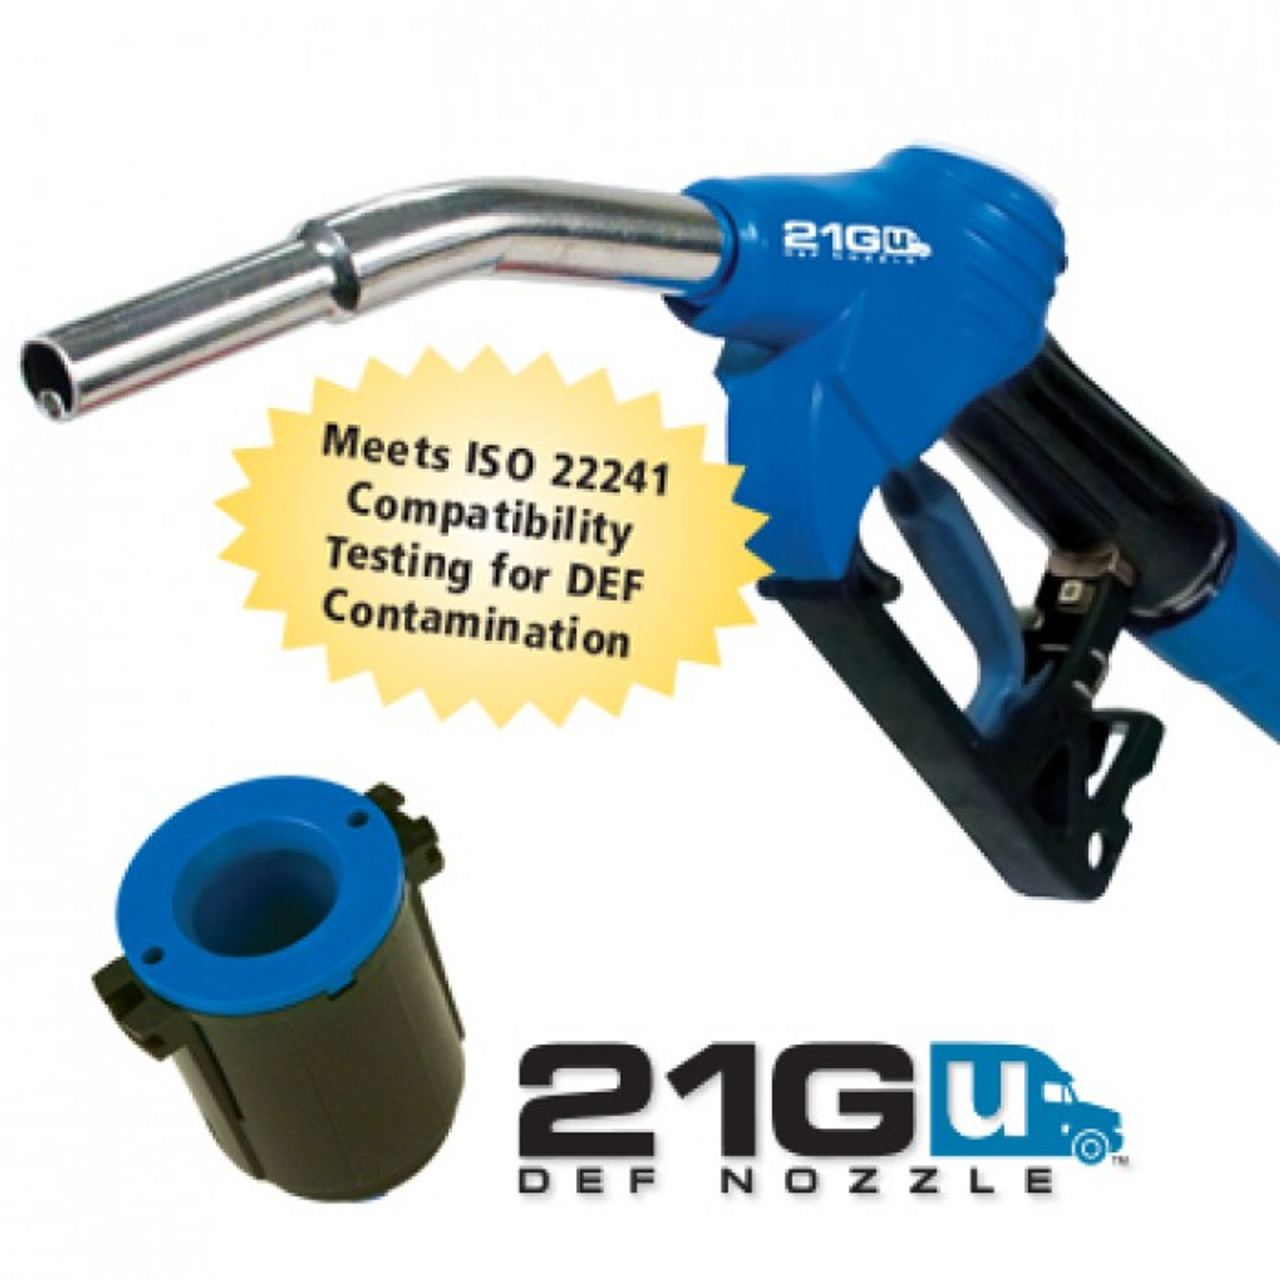 21GU-0500 - DEF nozzle, wayne, bennet use with mis-filling device